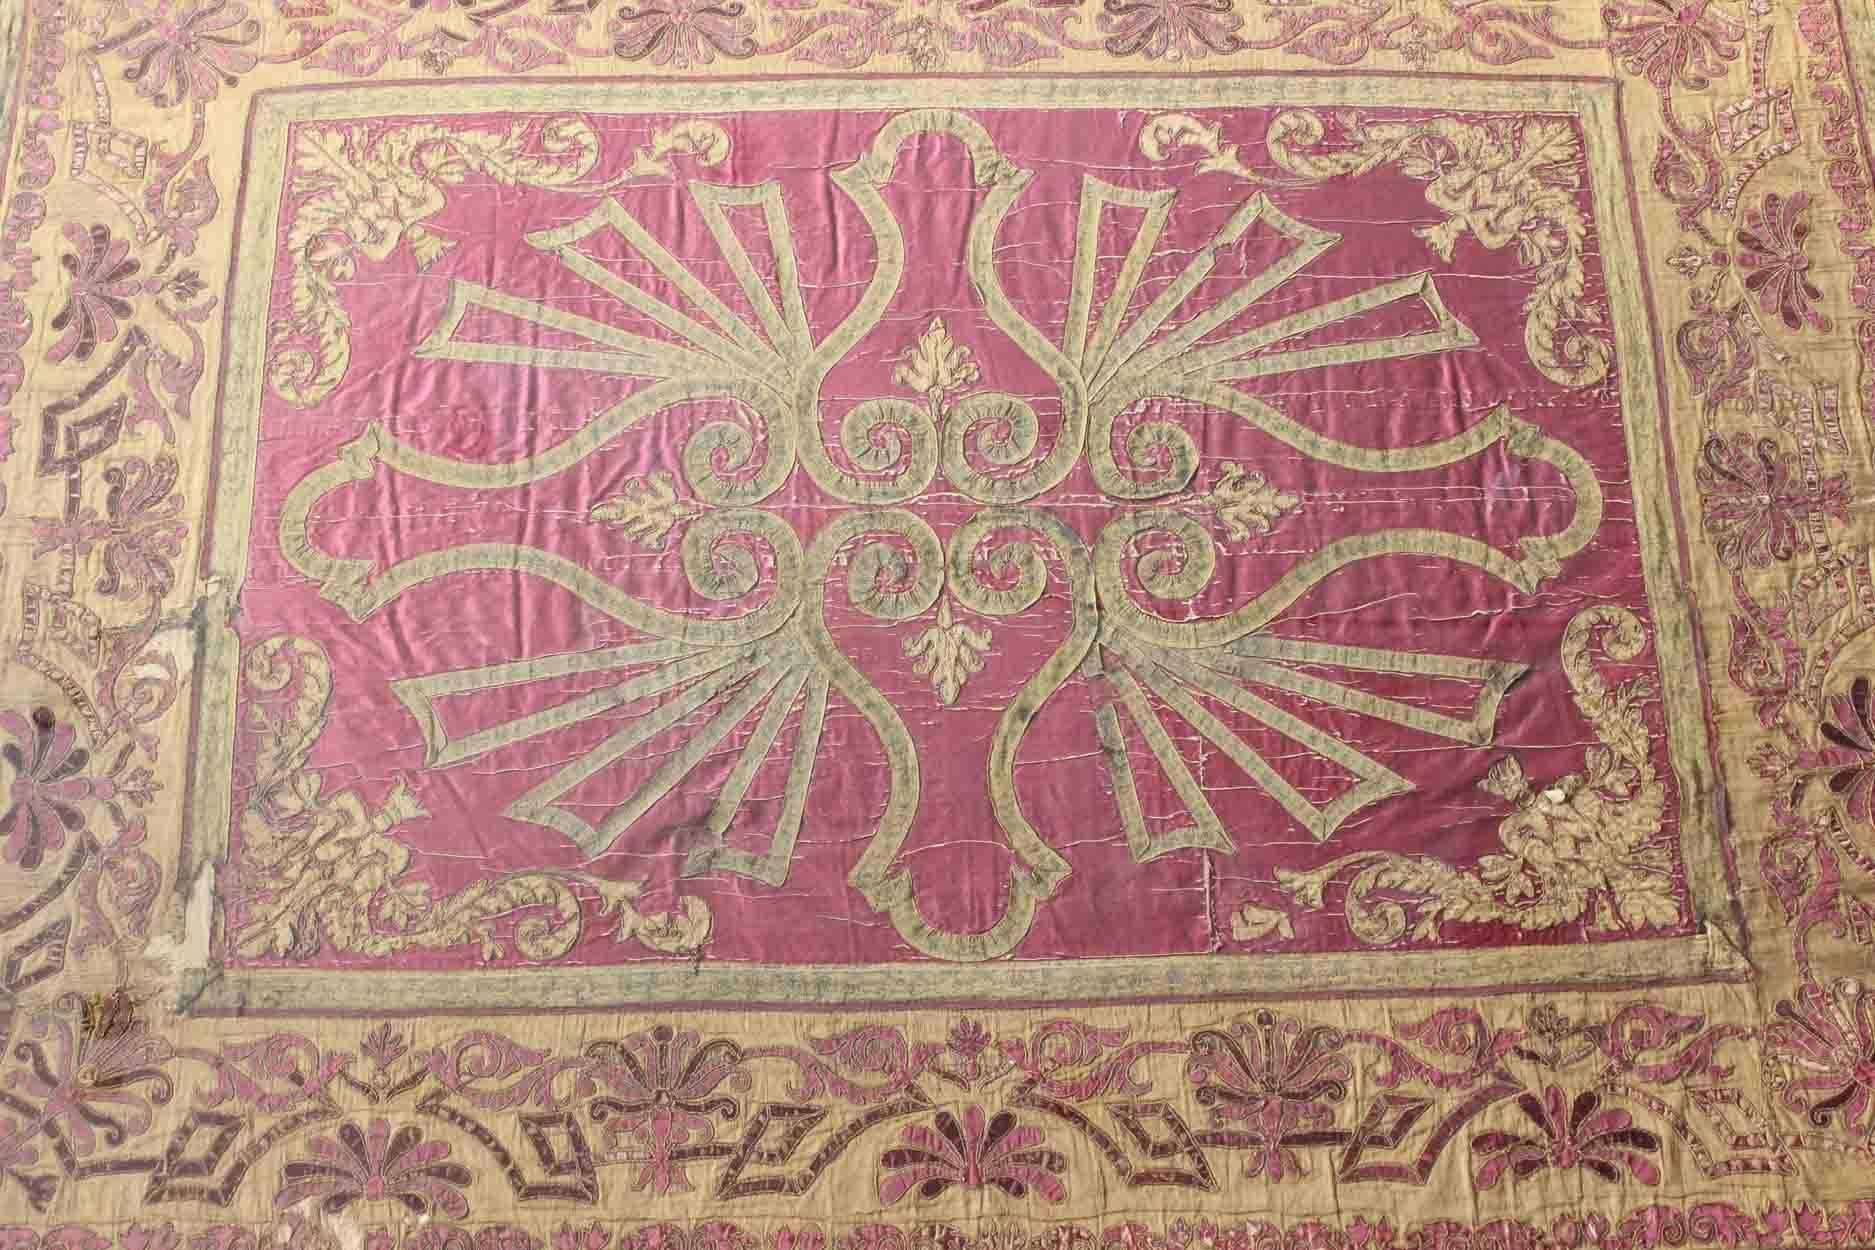 Framed antique European silk tapestry/bed spread with ornate design in purple red, rug 17-0604, country of origin / type: Europe / Tapestry, circa 1550.

This antique framed tapestry functioned as a royal silk bedspread almost 500 years ago, circa